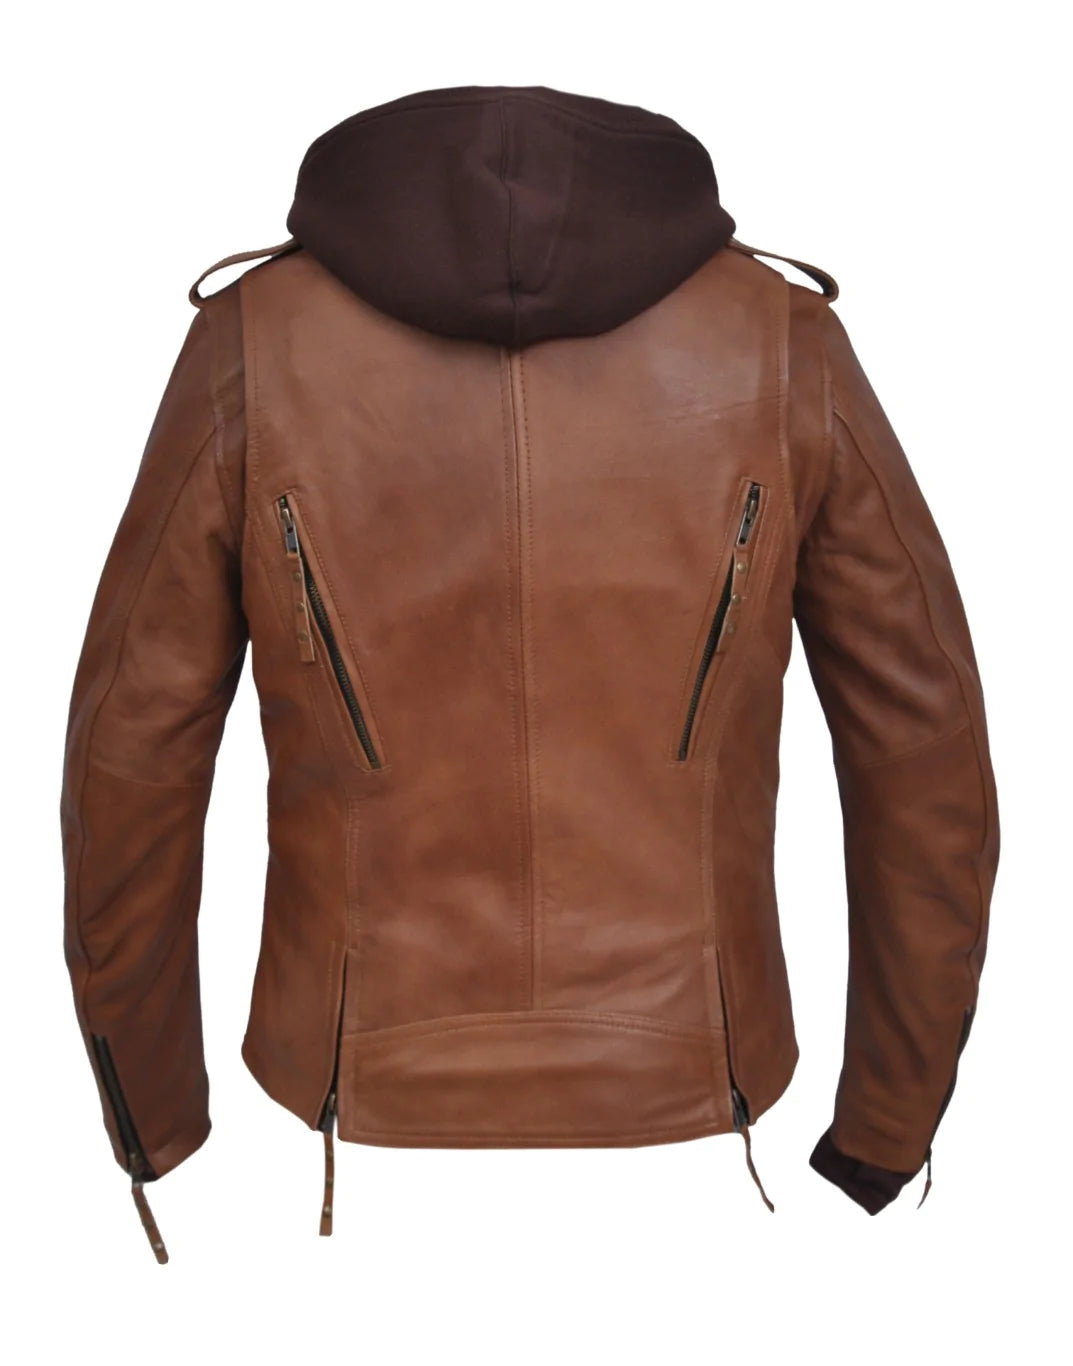 6841.ANT- Women's Brown Leather Jacket With Hood